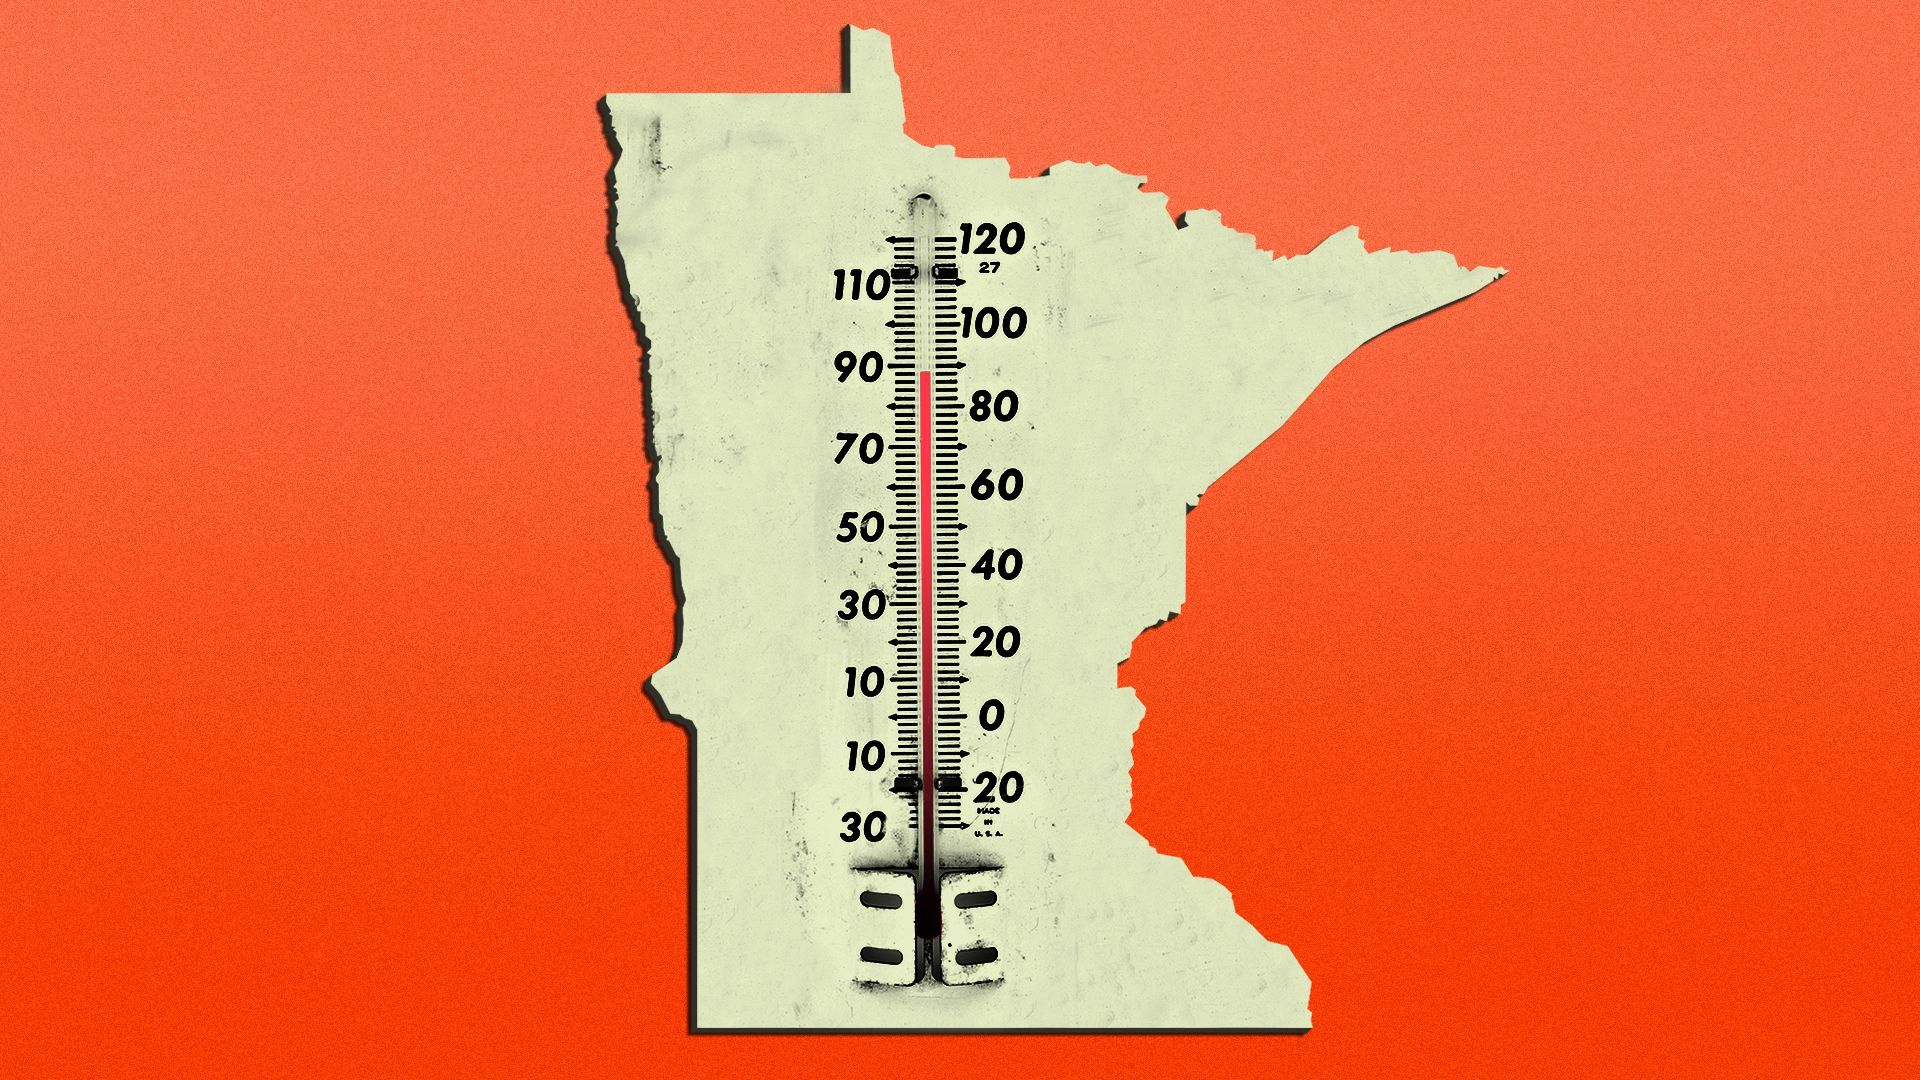 Illustration of a thermometer in the shape of Minnesota registering 90 degrees.